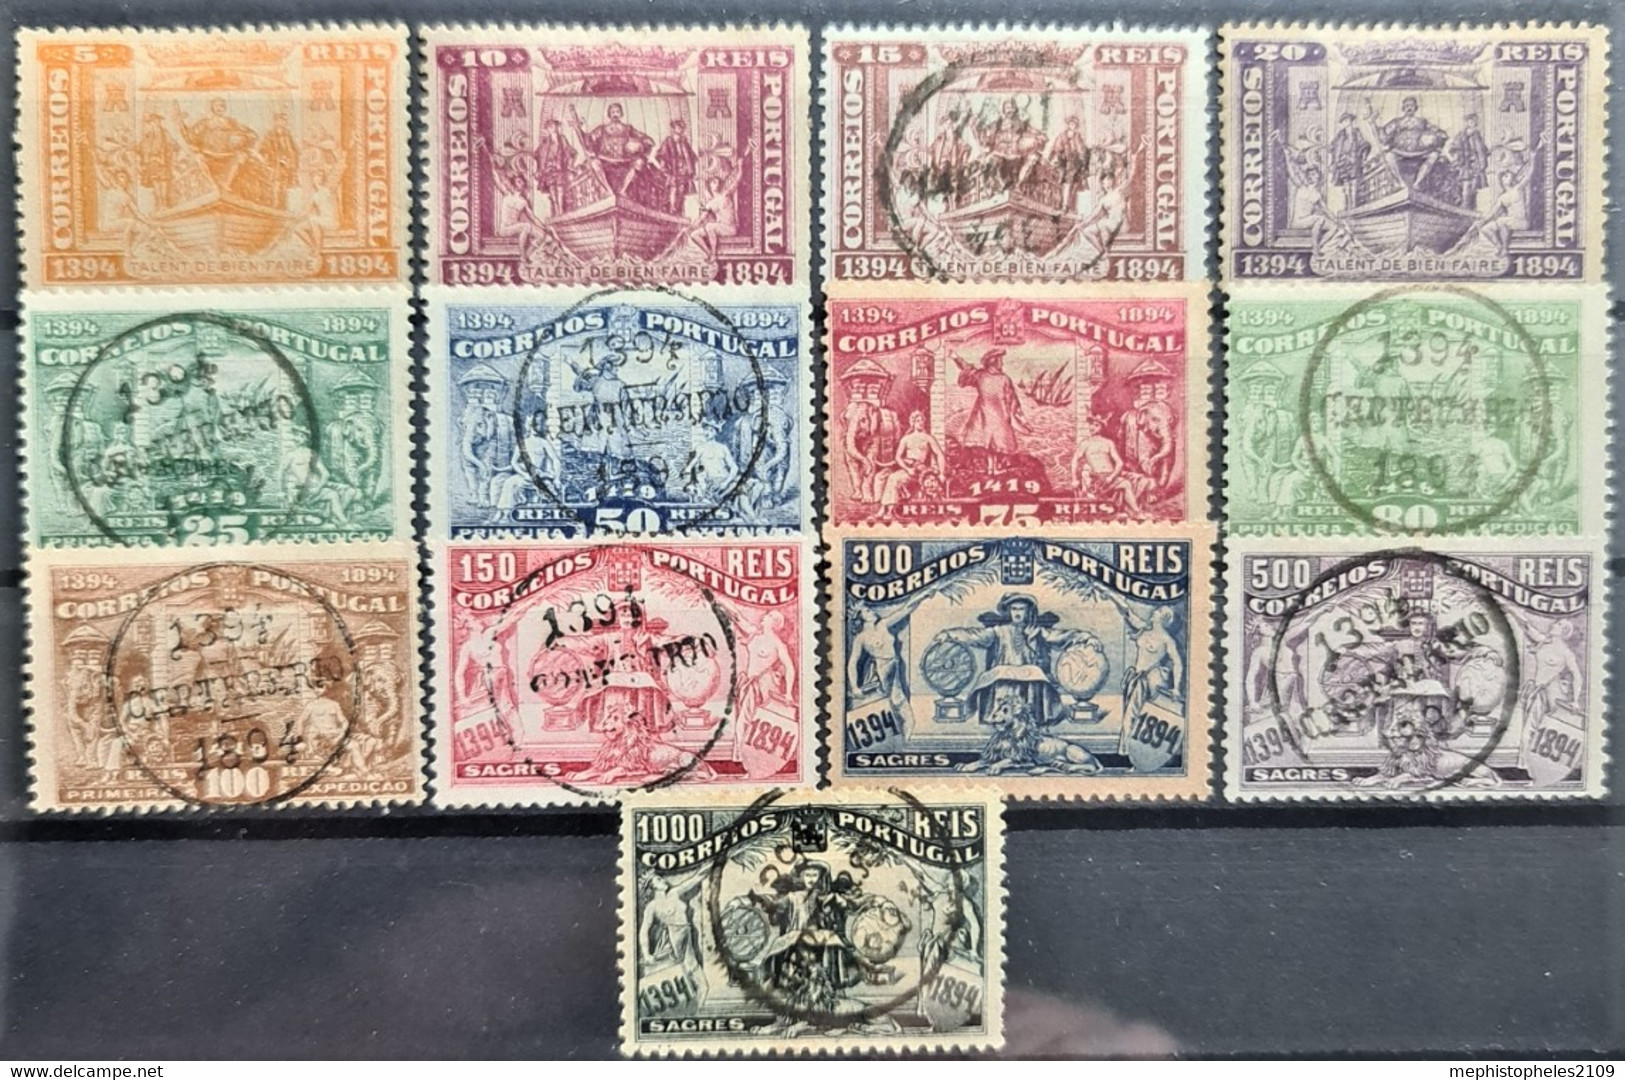 PORTUGAL 1894 - MLH/canceled - Sc# 97-109 - Complete Set! - Used Stamps